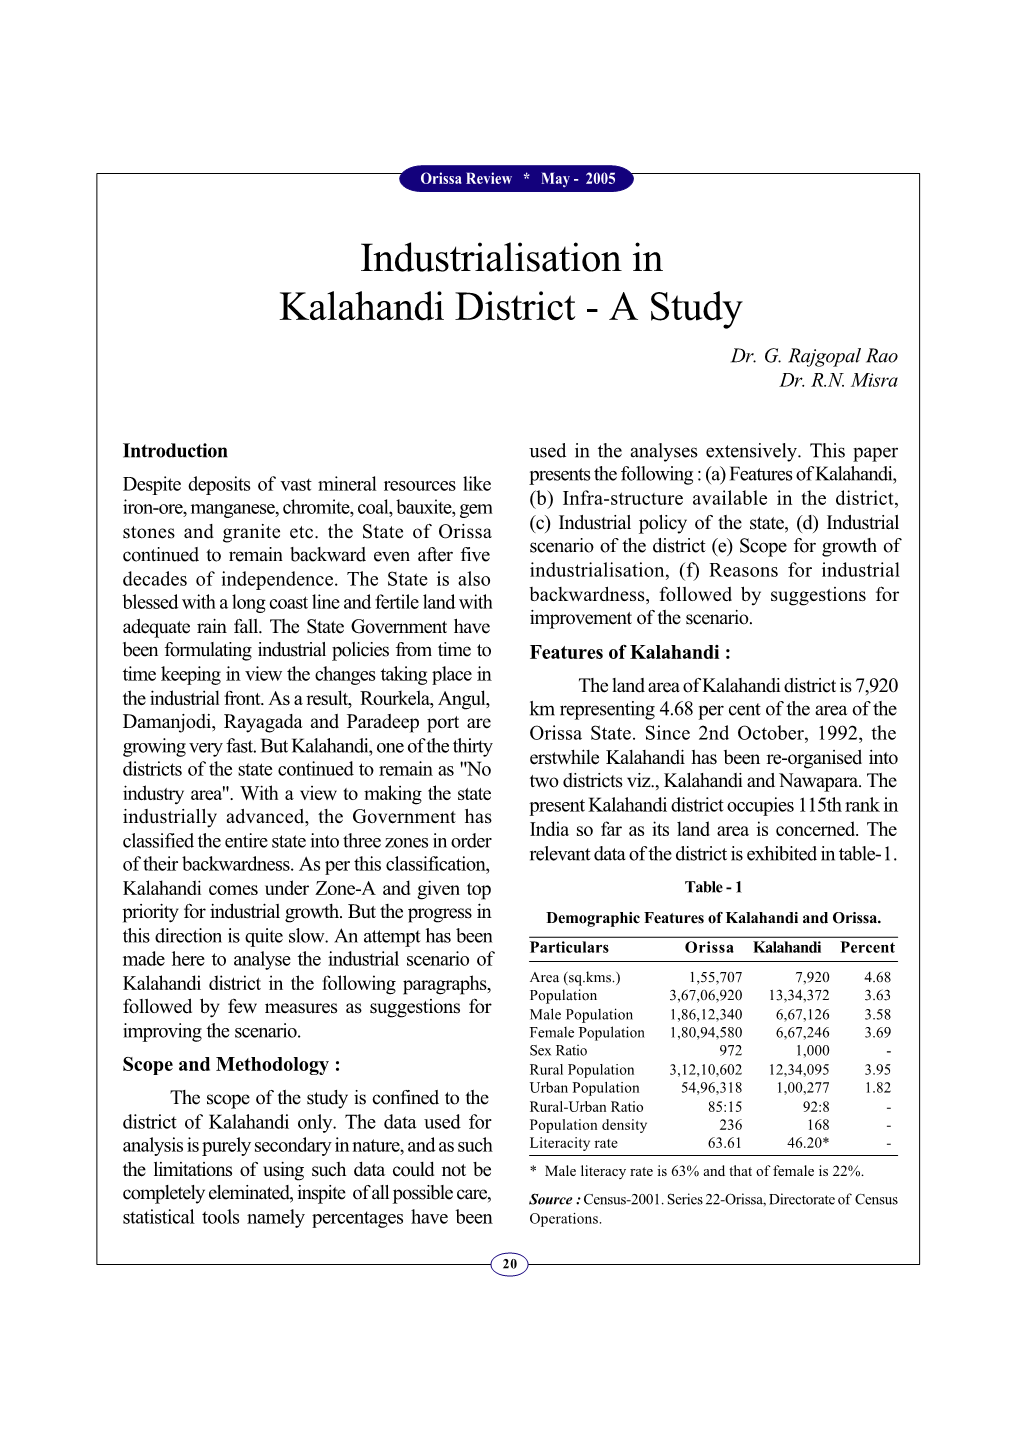 Industrialisation in Kalahandi District - a Study Dr